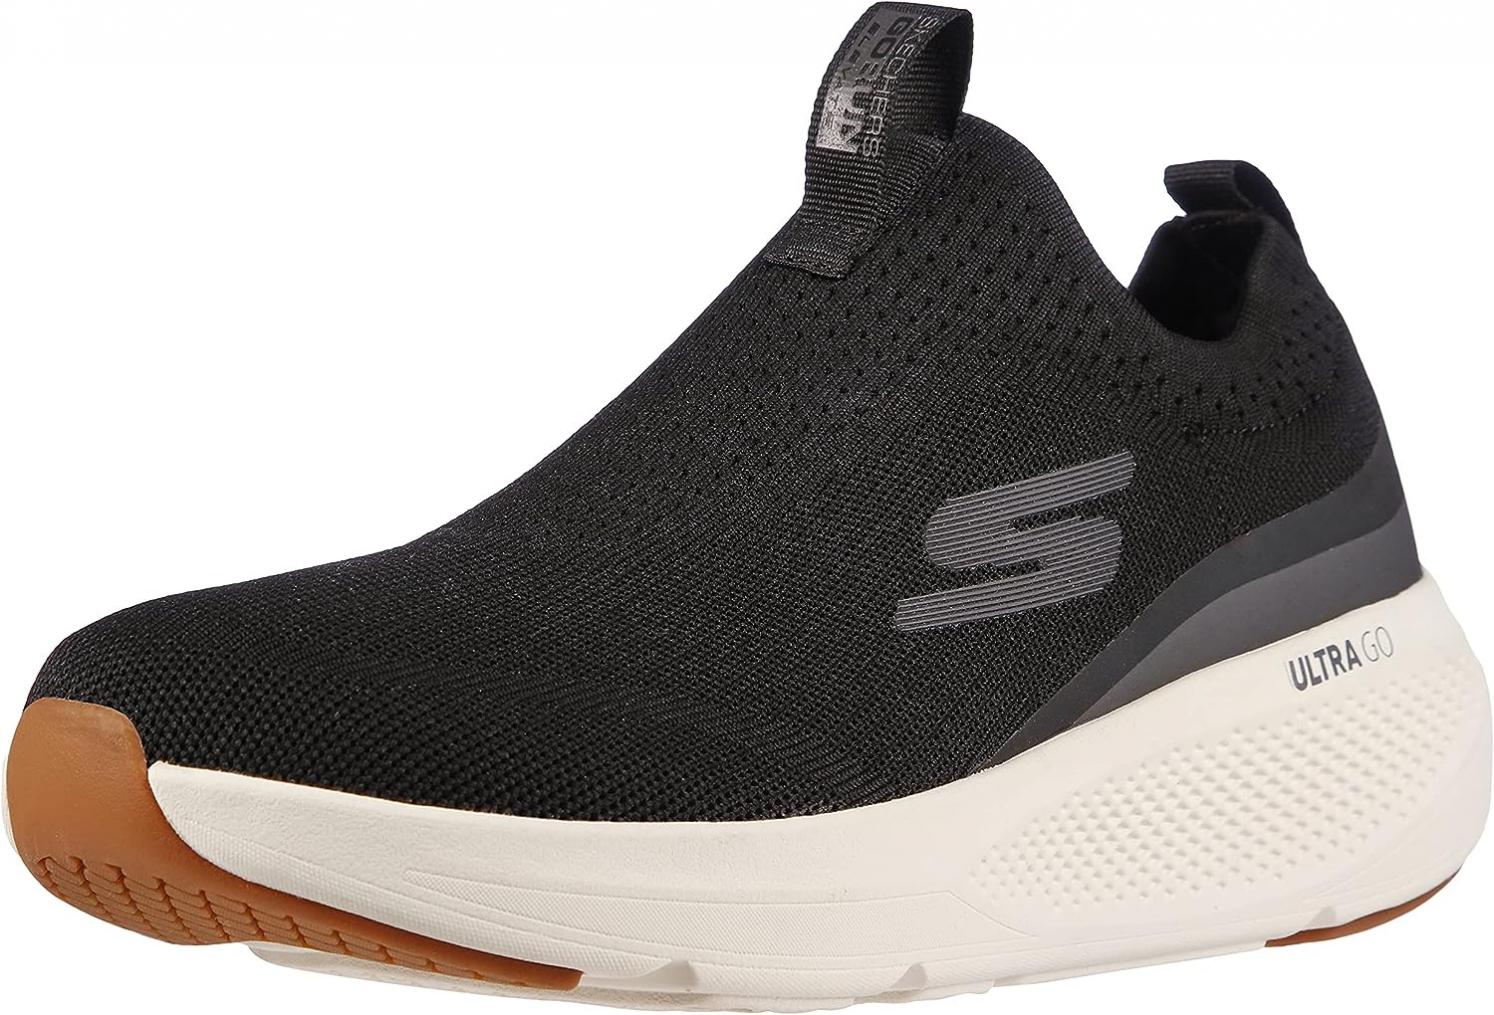 Skechers Men's GOrun Elevate-Athletic Slip-on Workout Running Shoe Sneaker with Cushioning